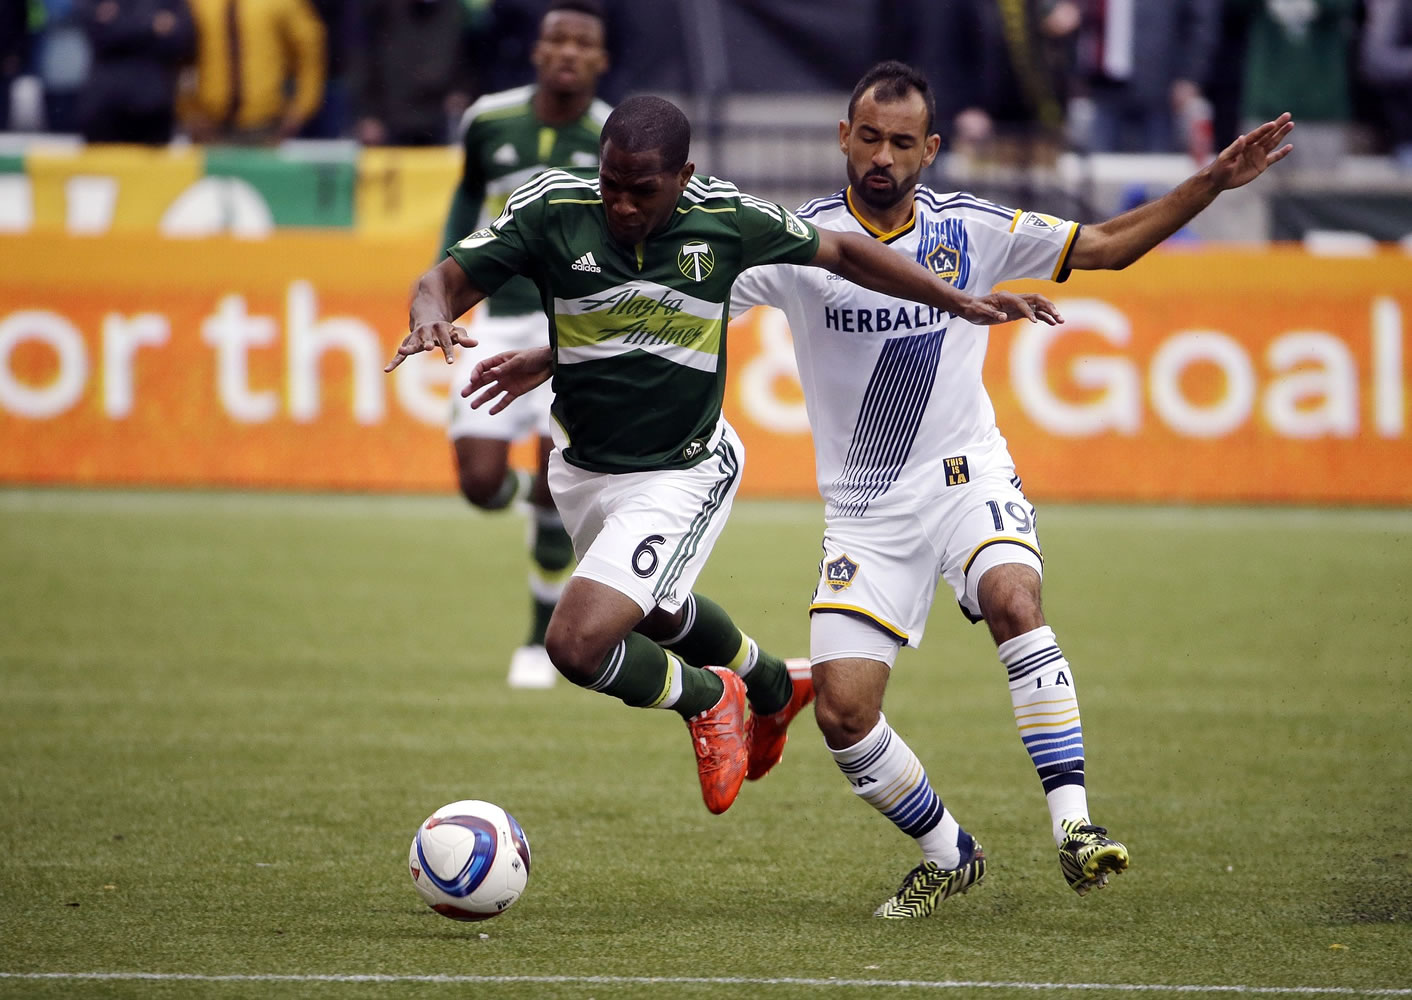 Portland Timbers forward Darlington Nagbe, left, chases down the ball against Los Angeles Galaxy midfielder Juninho during the first half of an MLS soccer game in Portland, Ore., Sunday, March 15, 2015.